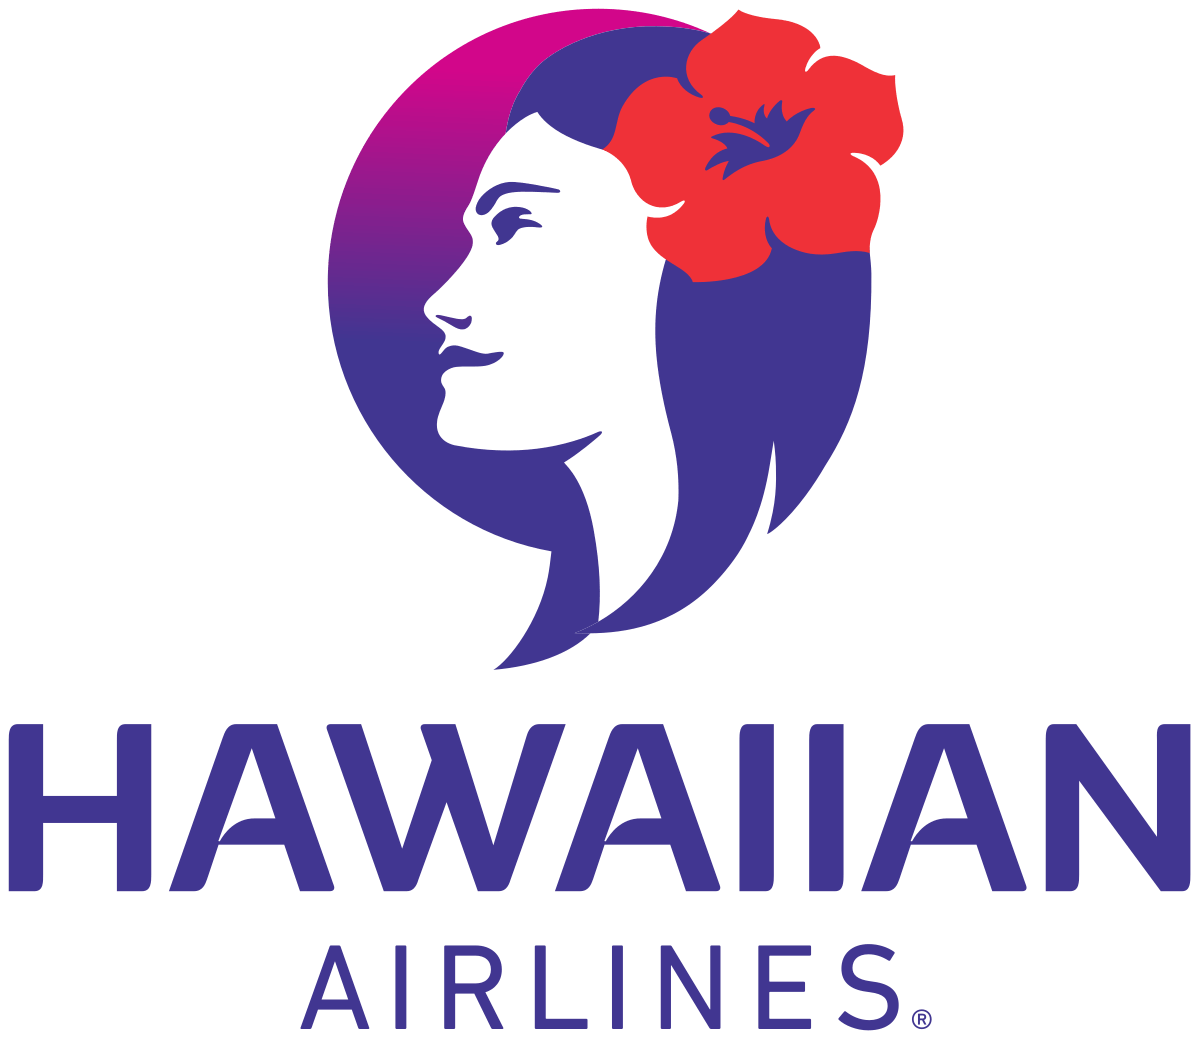 Leading Airline Logo - Hawaiian Airlines